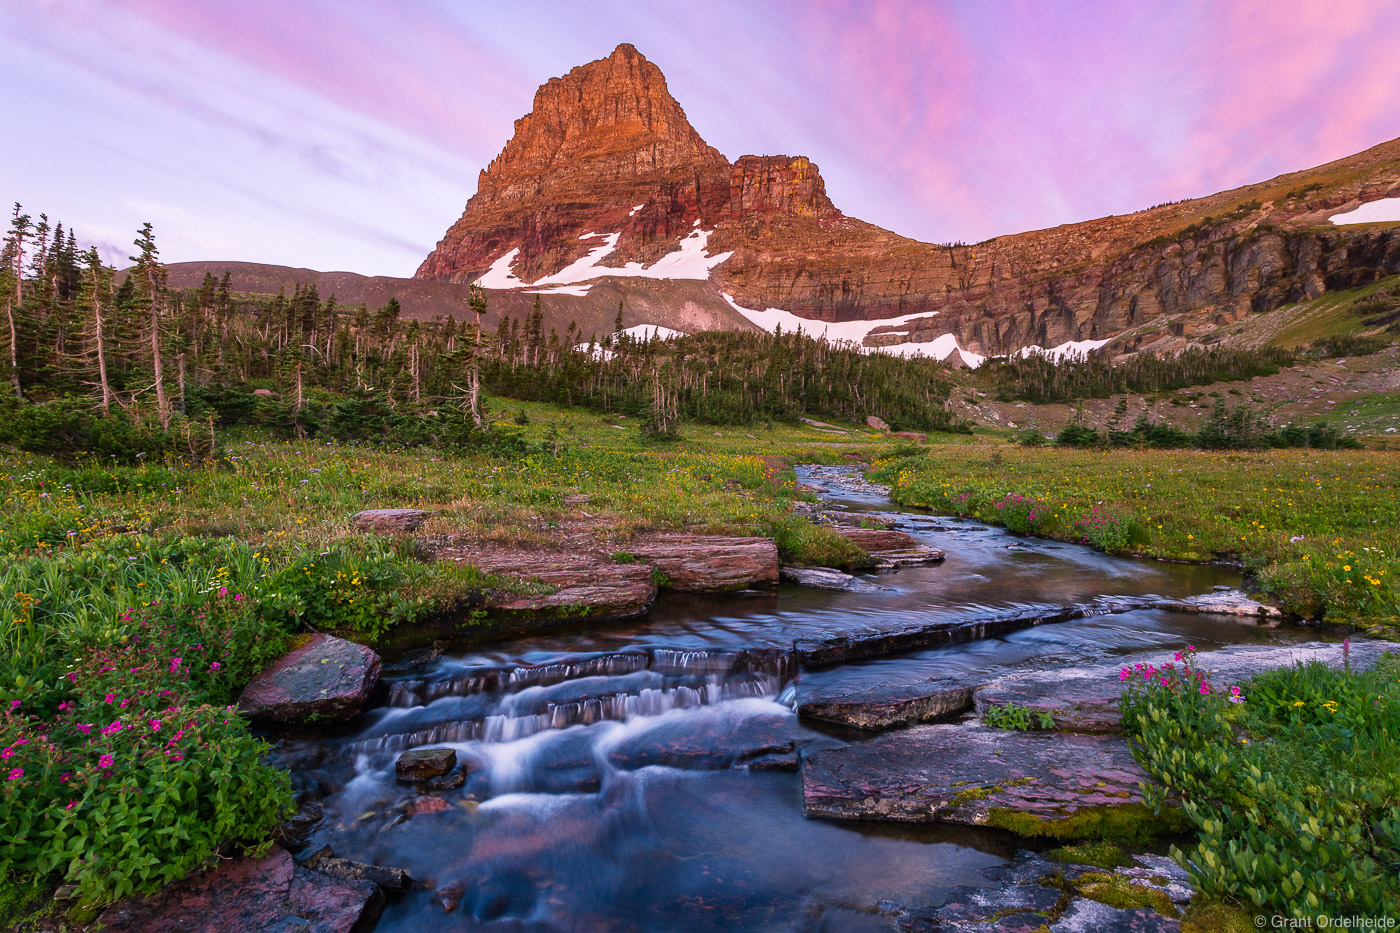 A summer sunrise over Clements Mountain in Montana's Glacier National Park.